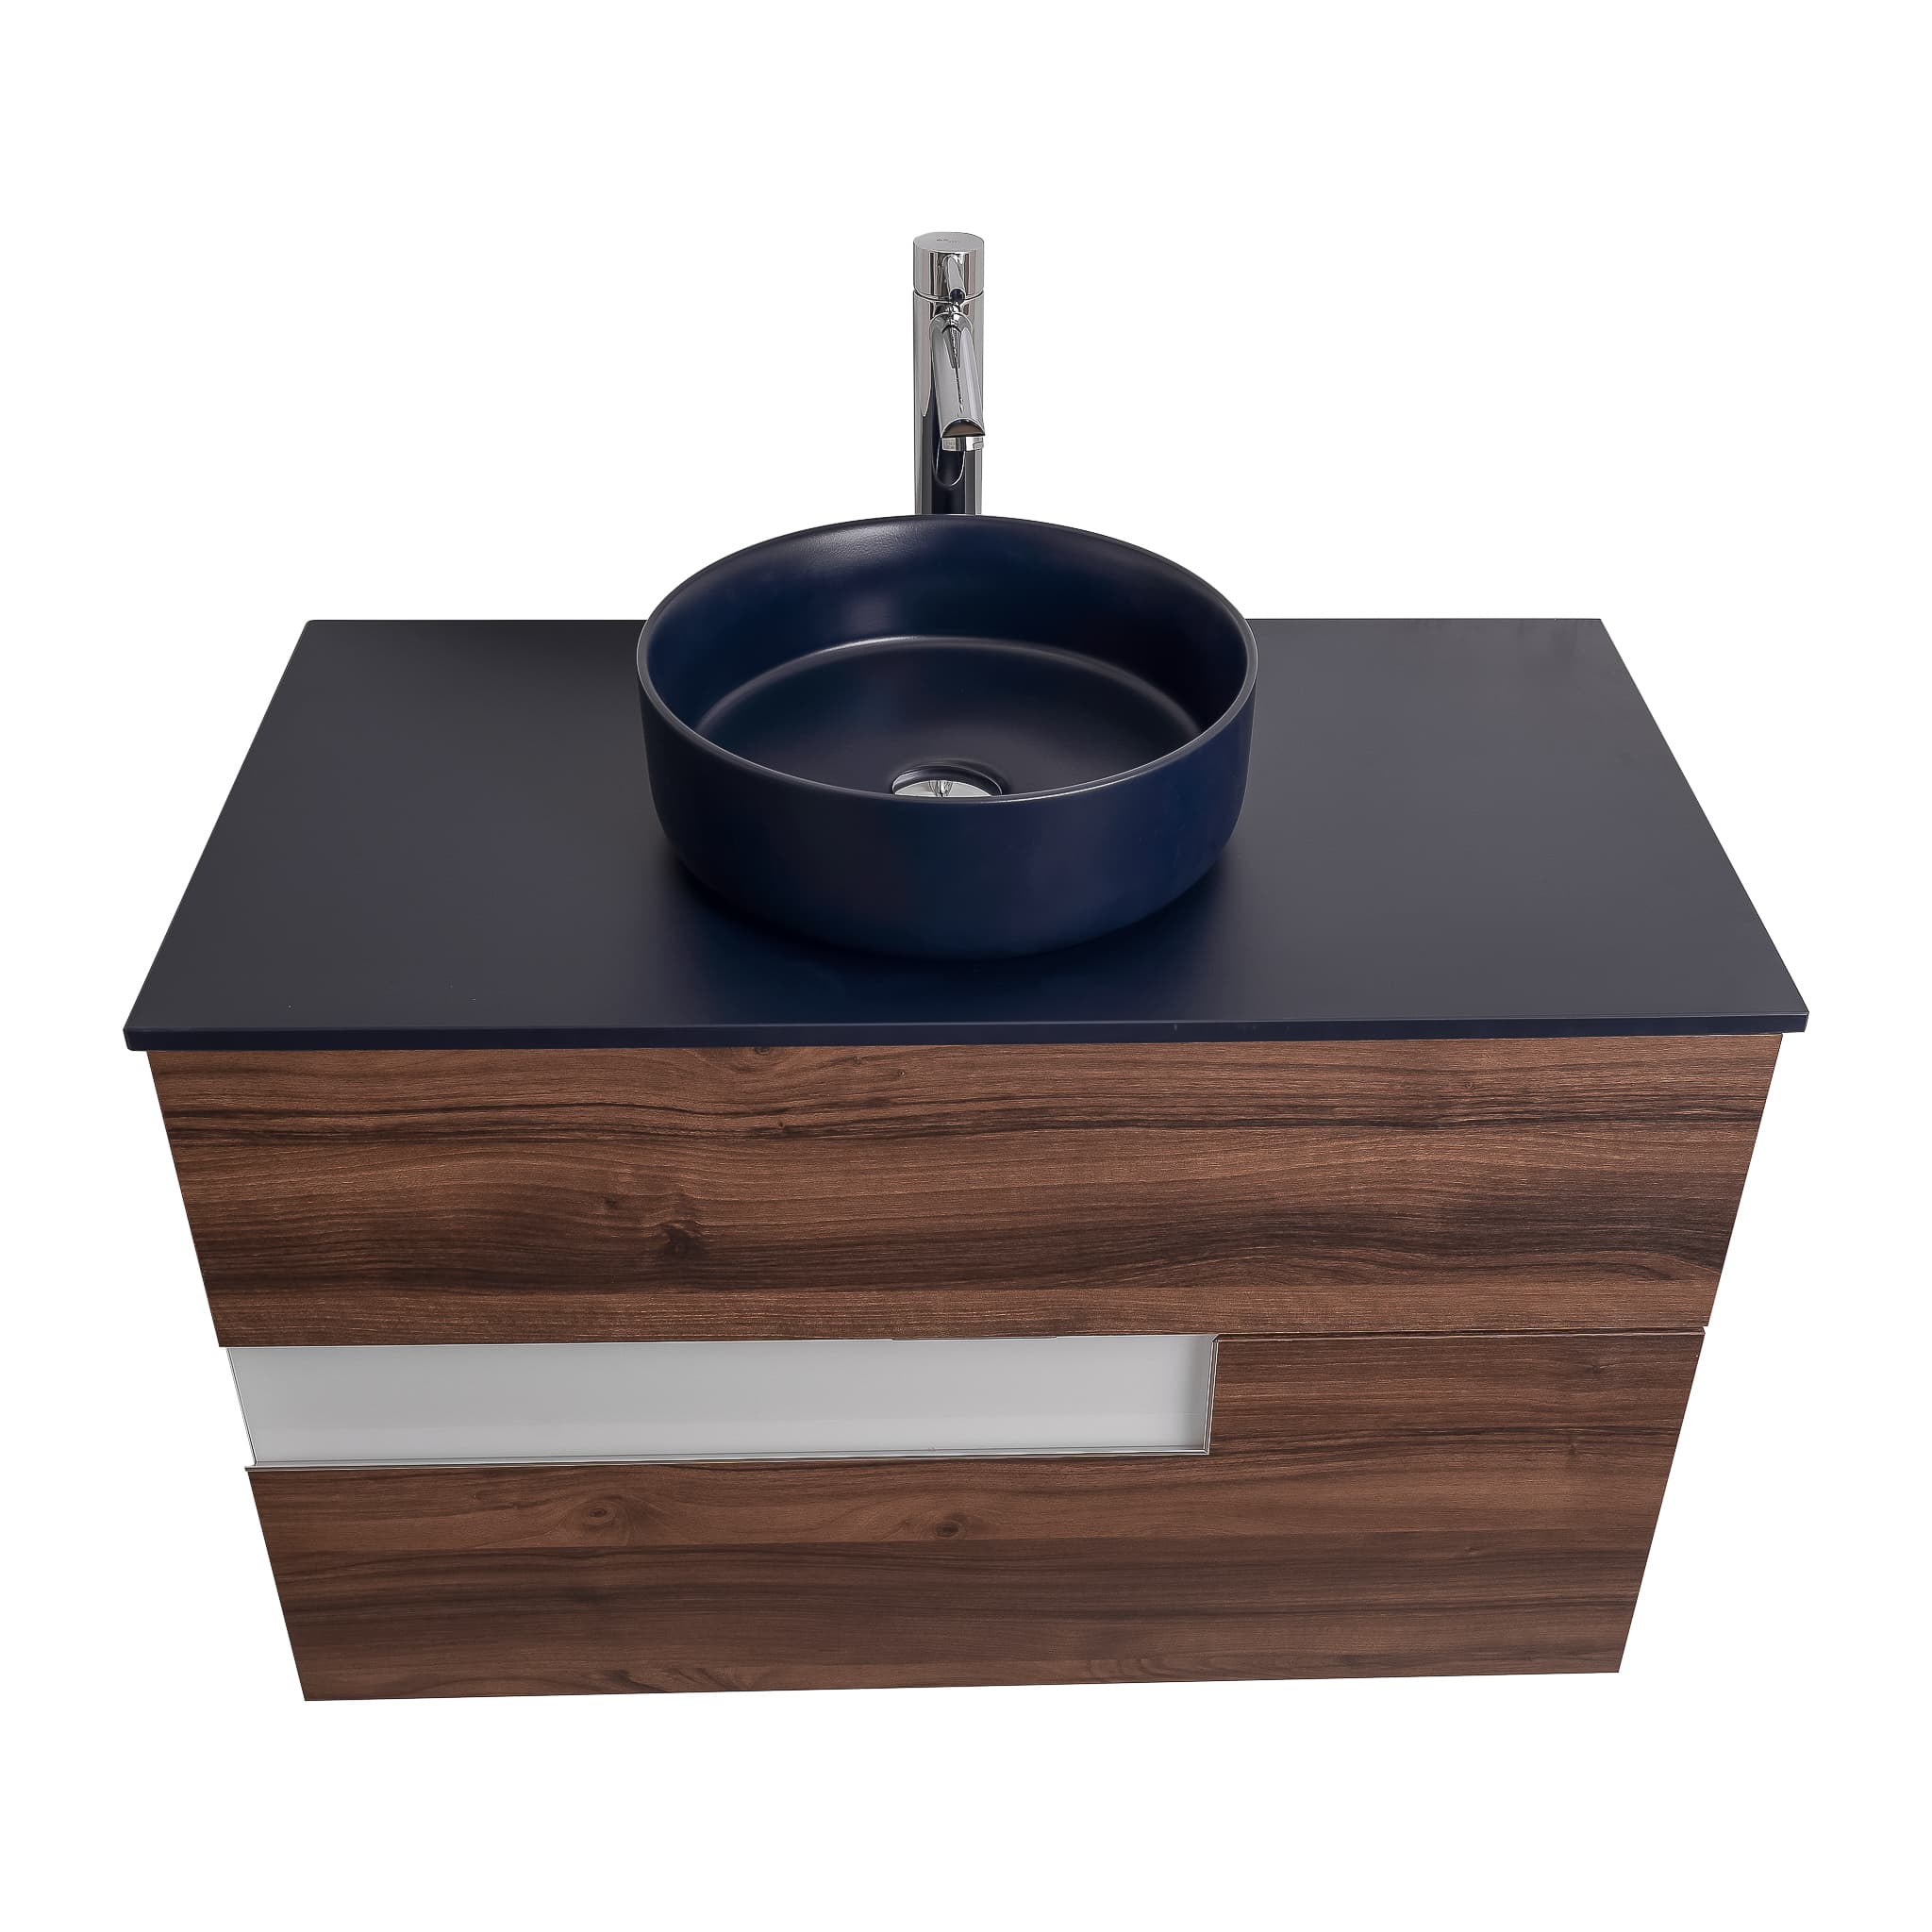 Vision 39.5 Valenti Medium Brown Wood Cabinet, Ares Navy Blue Top And Ares Navy Blue Ceramic Basin, Wall Mounted Modern Vanity Set